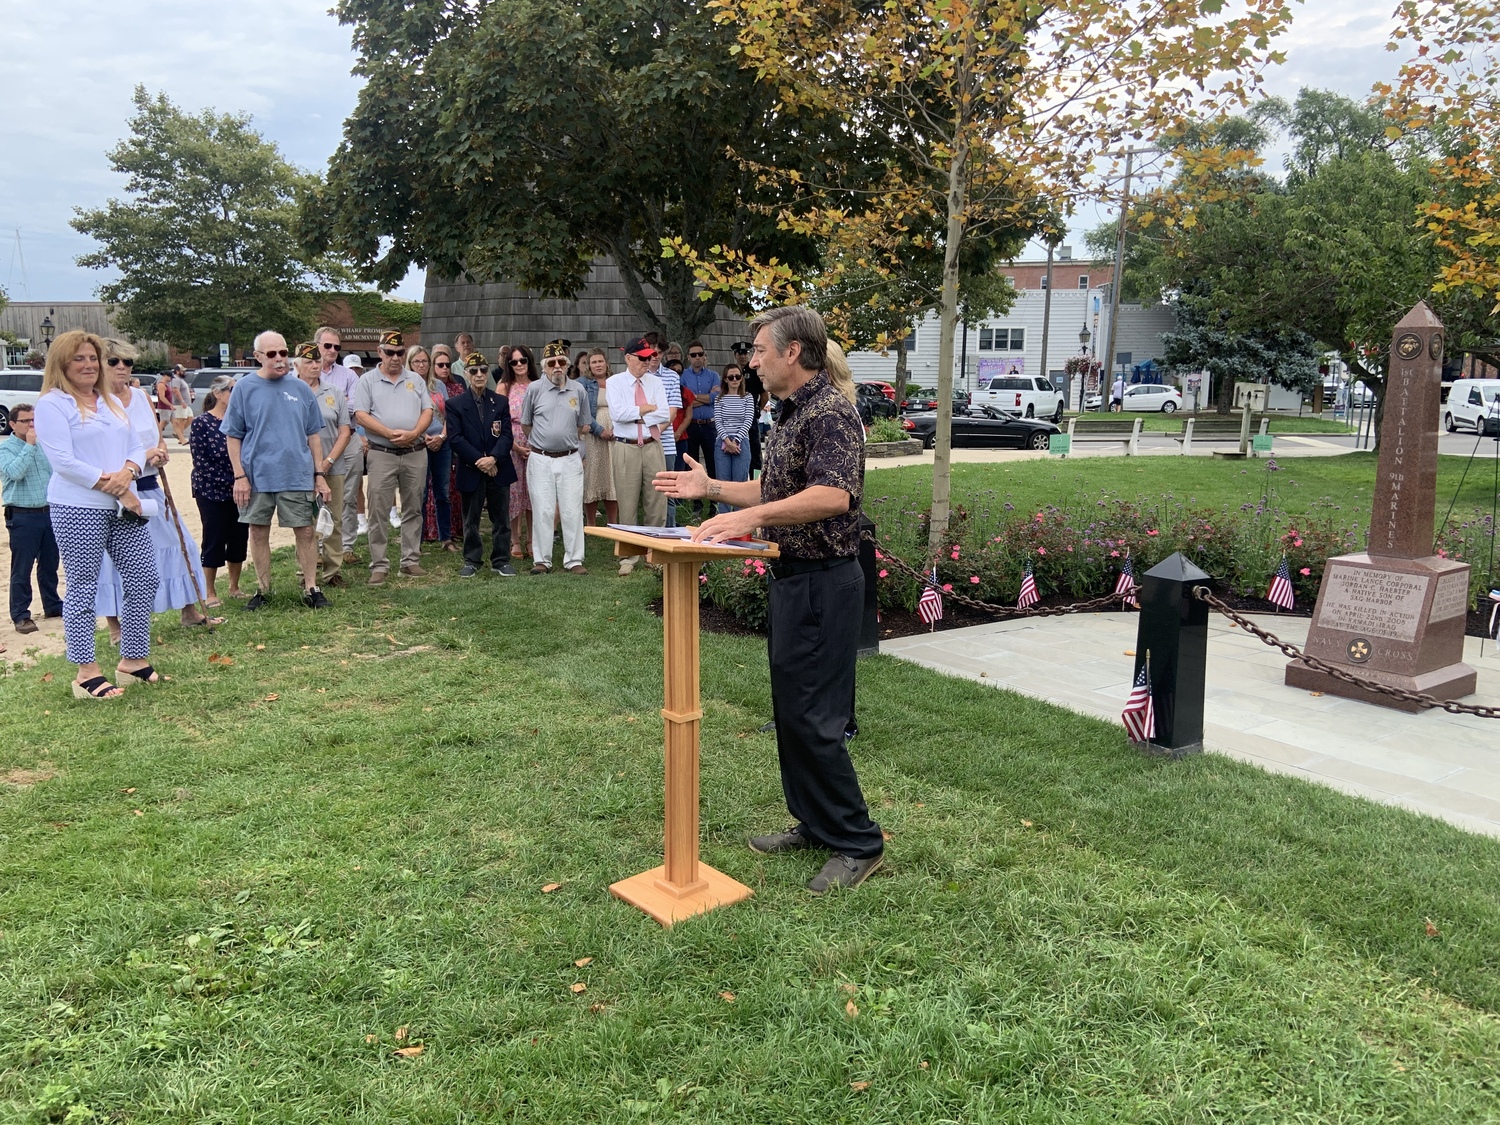 Mayor Tom Gardella addresses the crowd that gathered to rededicate a monument erected to the memory of U.S. Marine Lance Cpl. Jordan Haerter, who was killed in Iraq in 2008. STEPHEN J. KOTZ